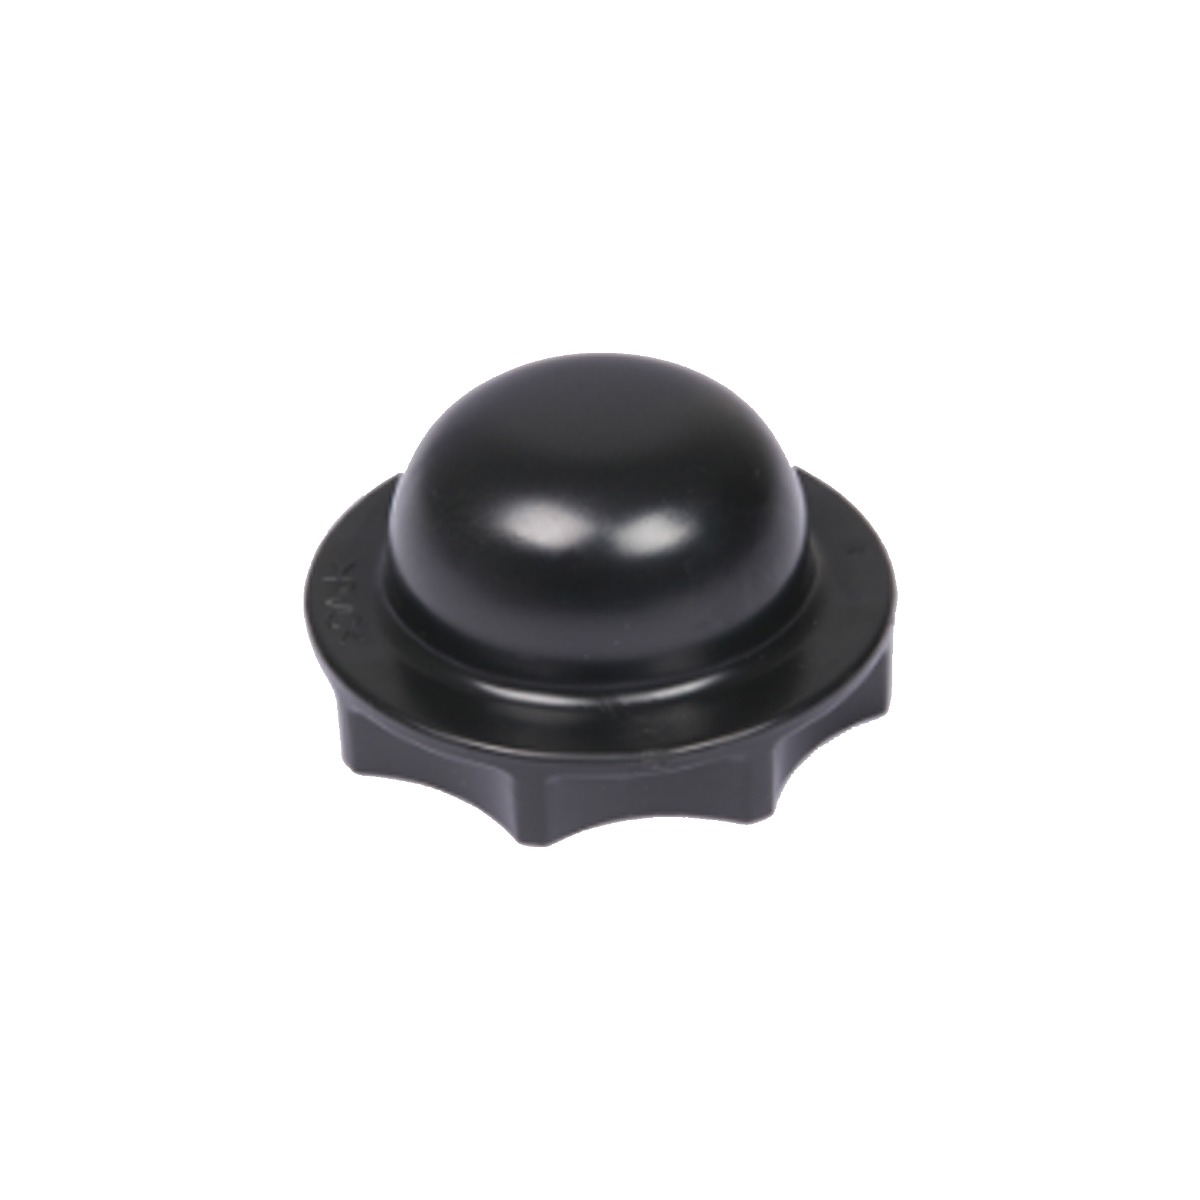 An image of Water Stopper Cap | Small Parts | Lay-Z-Spa